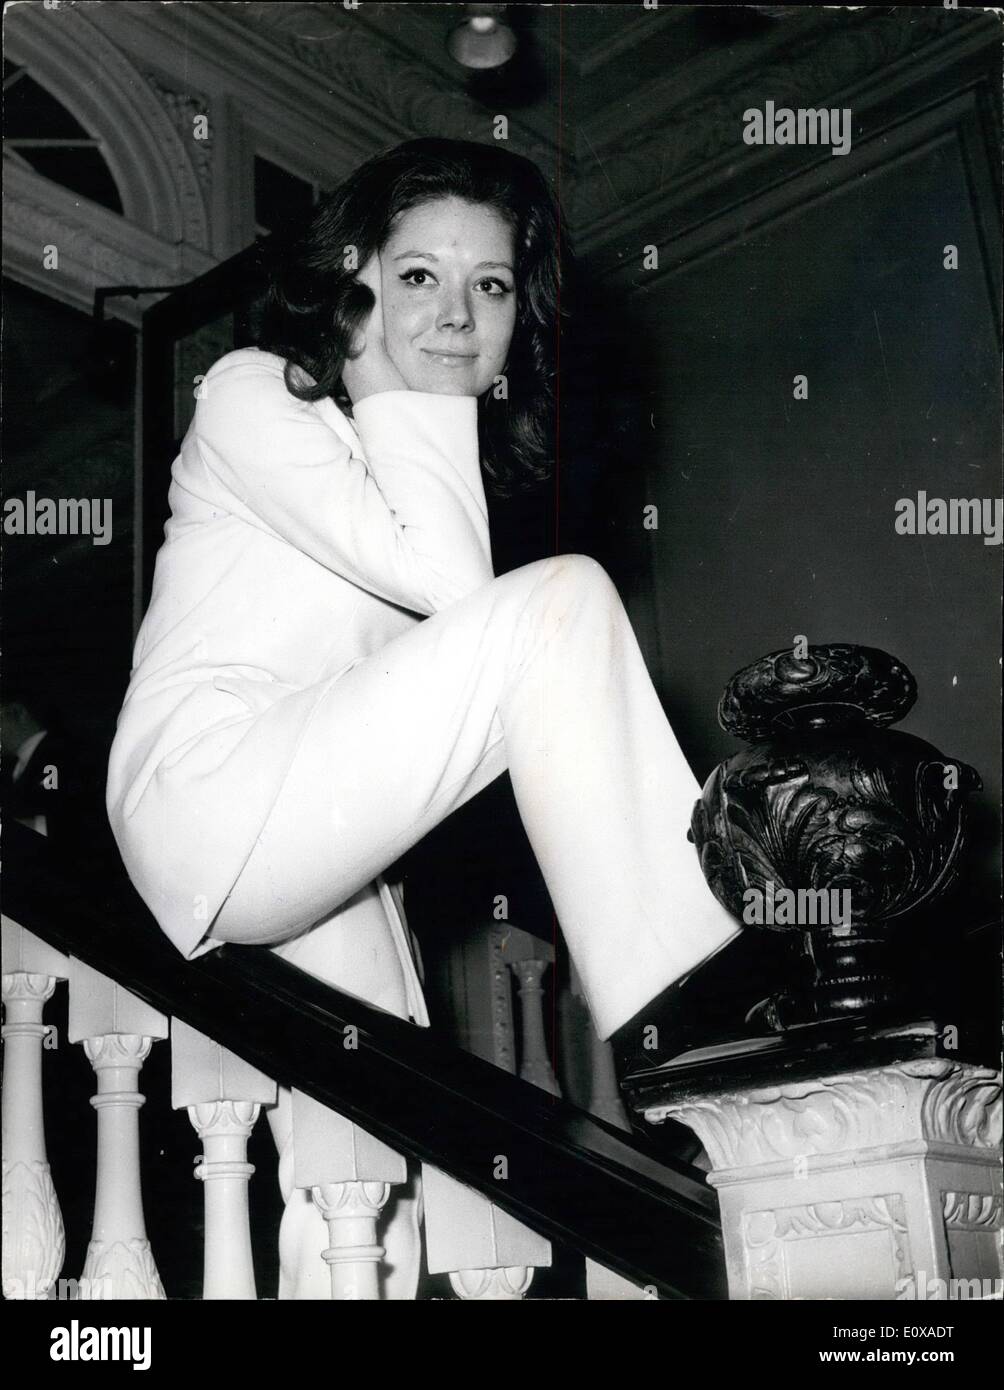 Jan. 01, 1966 - Diana Rigg wants a Rise; Diana Rigg, the judo girl of ITV's ''The Avengers'', returns to the Royal Shakespeare Company at Startford on Avon. She will play Viola in Twelfth night. Last night, Diana, whose 150 a week contract expires next month - said she would not return to the Avengers unless she had a big pay rise. Her salary with the Shakespeare Company will be 70 a week. Photo Shows Yesterday's picture of Diana Rigg -who has signed up for a season of Shakespeare. Stock Photo